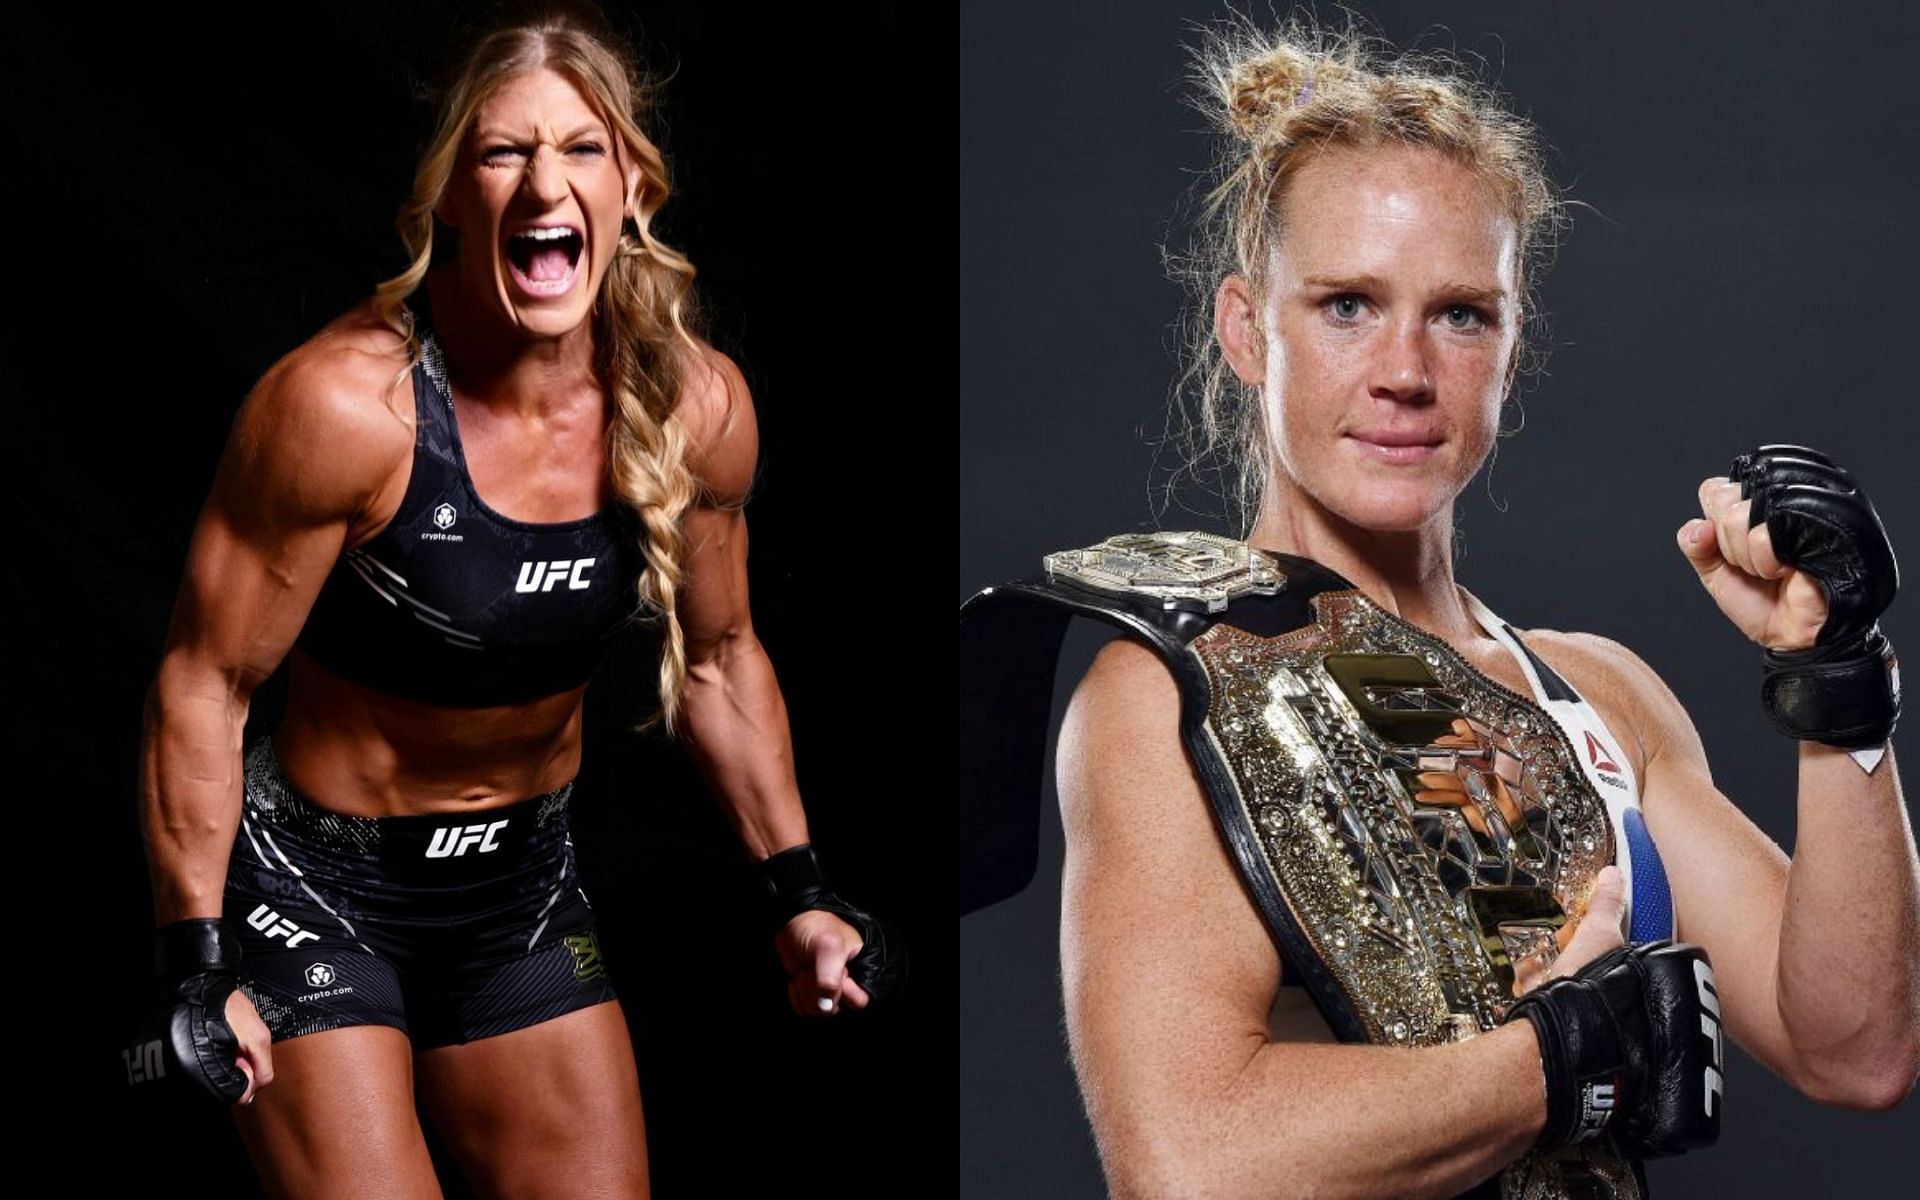 Kayla Harrison (left) made her UFC debut on April 13 against Holly Holm (right) [Photo Courtesy @kaylaharrisonofficial on Instagram and Getty Images]